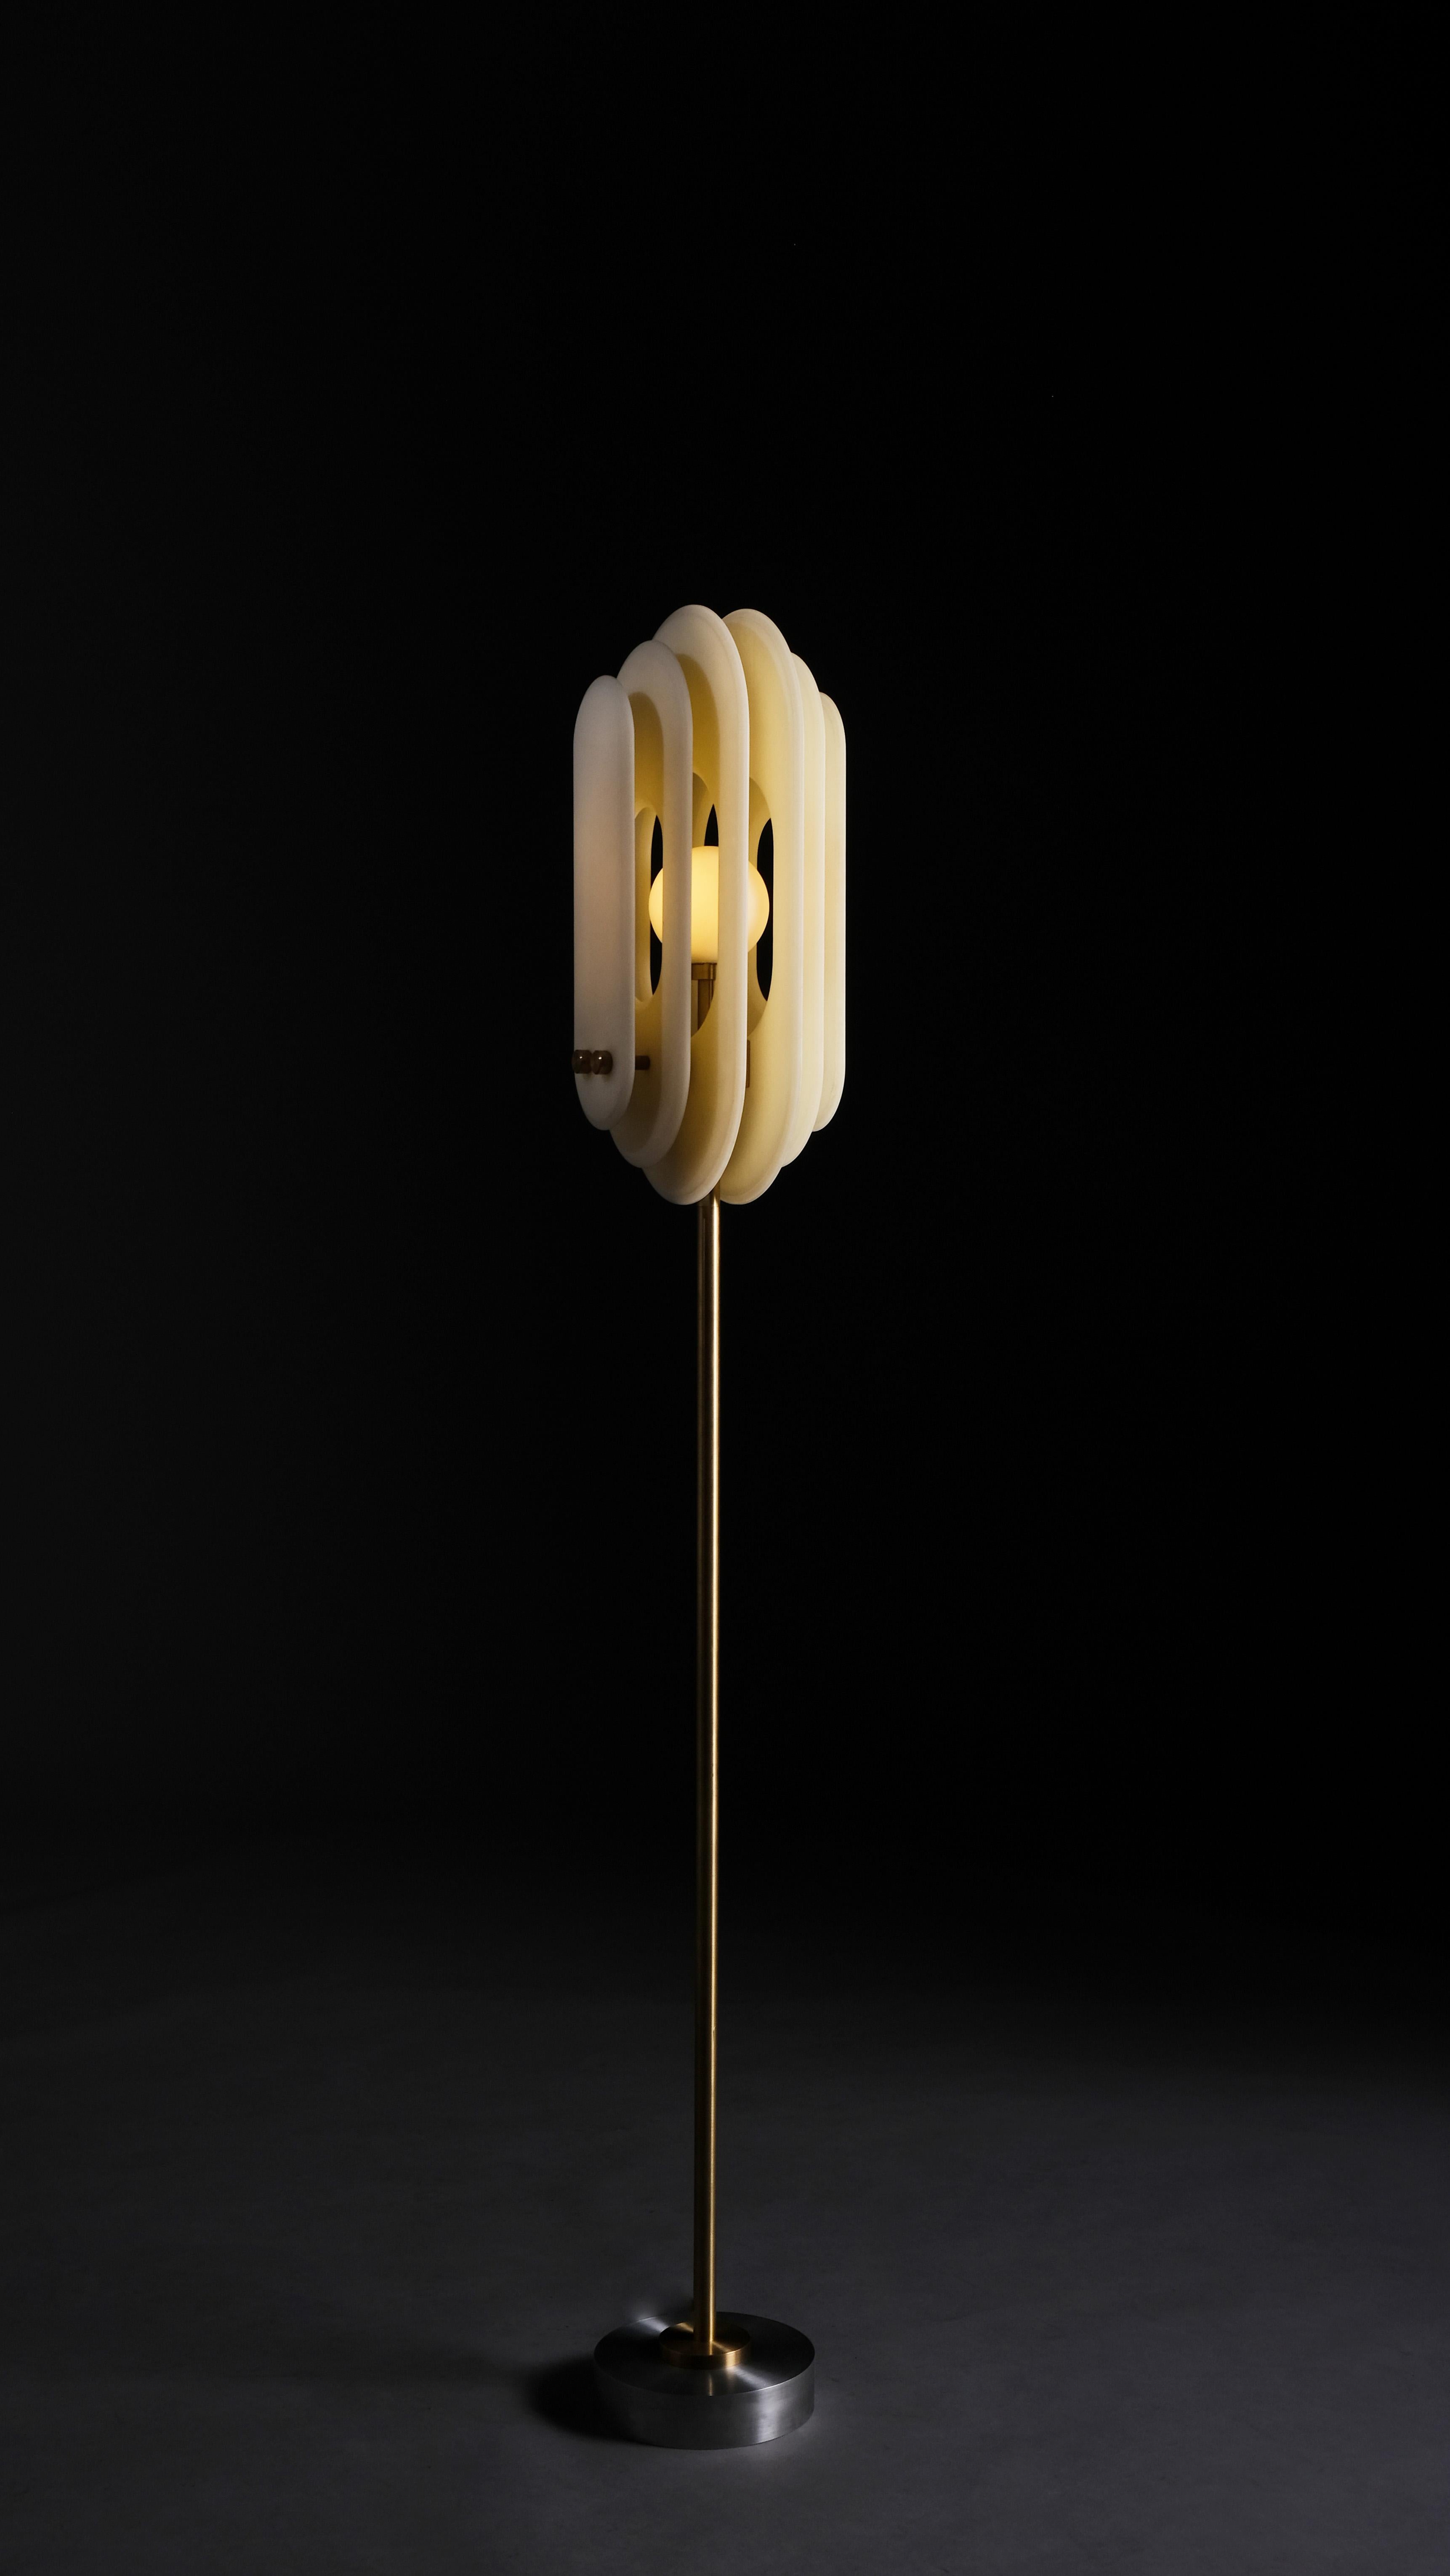 Floor lamp 02 by Adam Caplowe for VIDIVIXI
Dimensions: L 18 x W 18 x H 120 cm
Materials: Brass, resin, glass.

All our lamps can be wired according to each country. If sold to the USA it will be wired for the USA for instance.

Adam Caplowe,